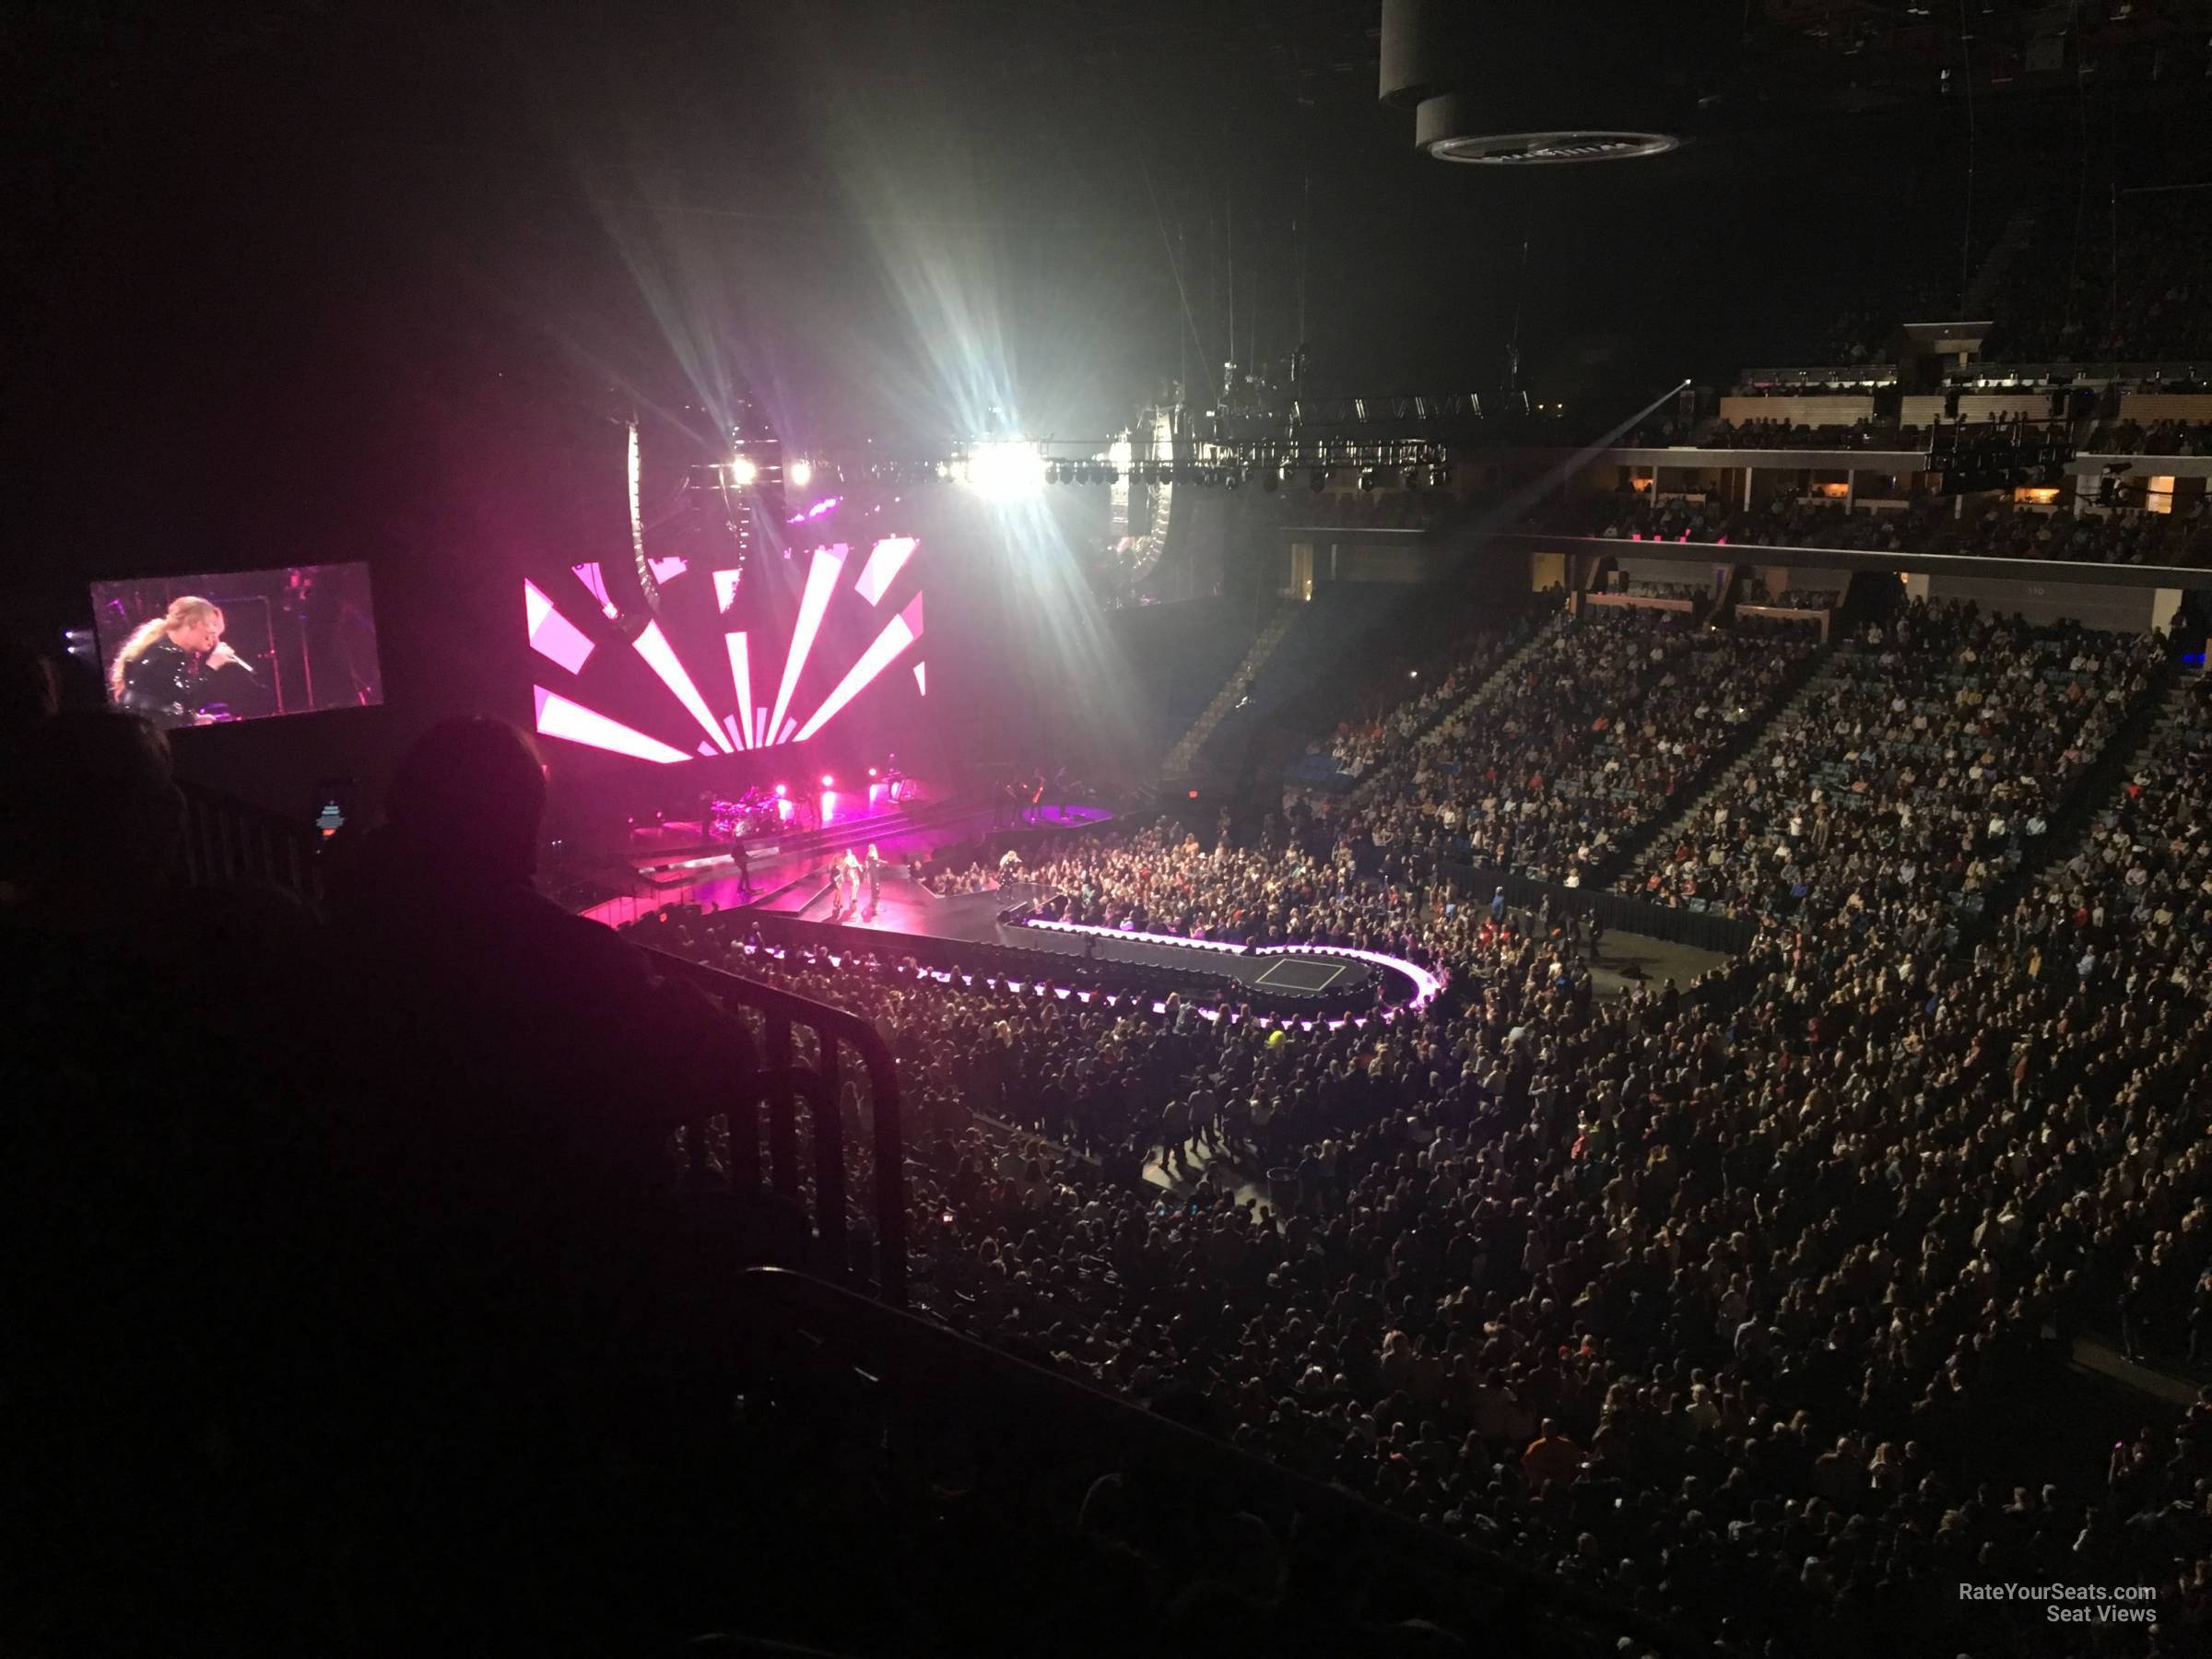 Section 328 at BOK Center for Concerts